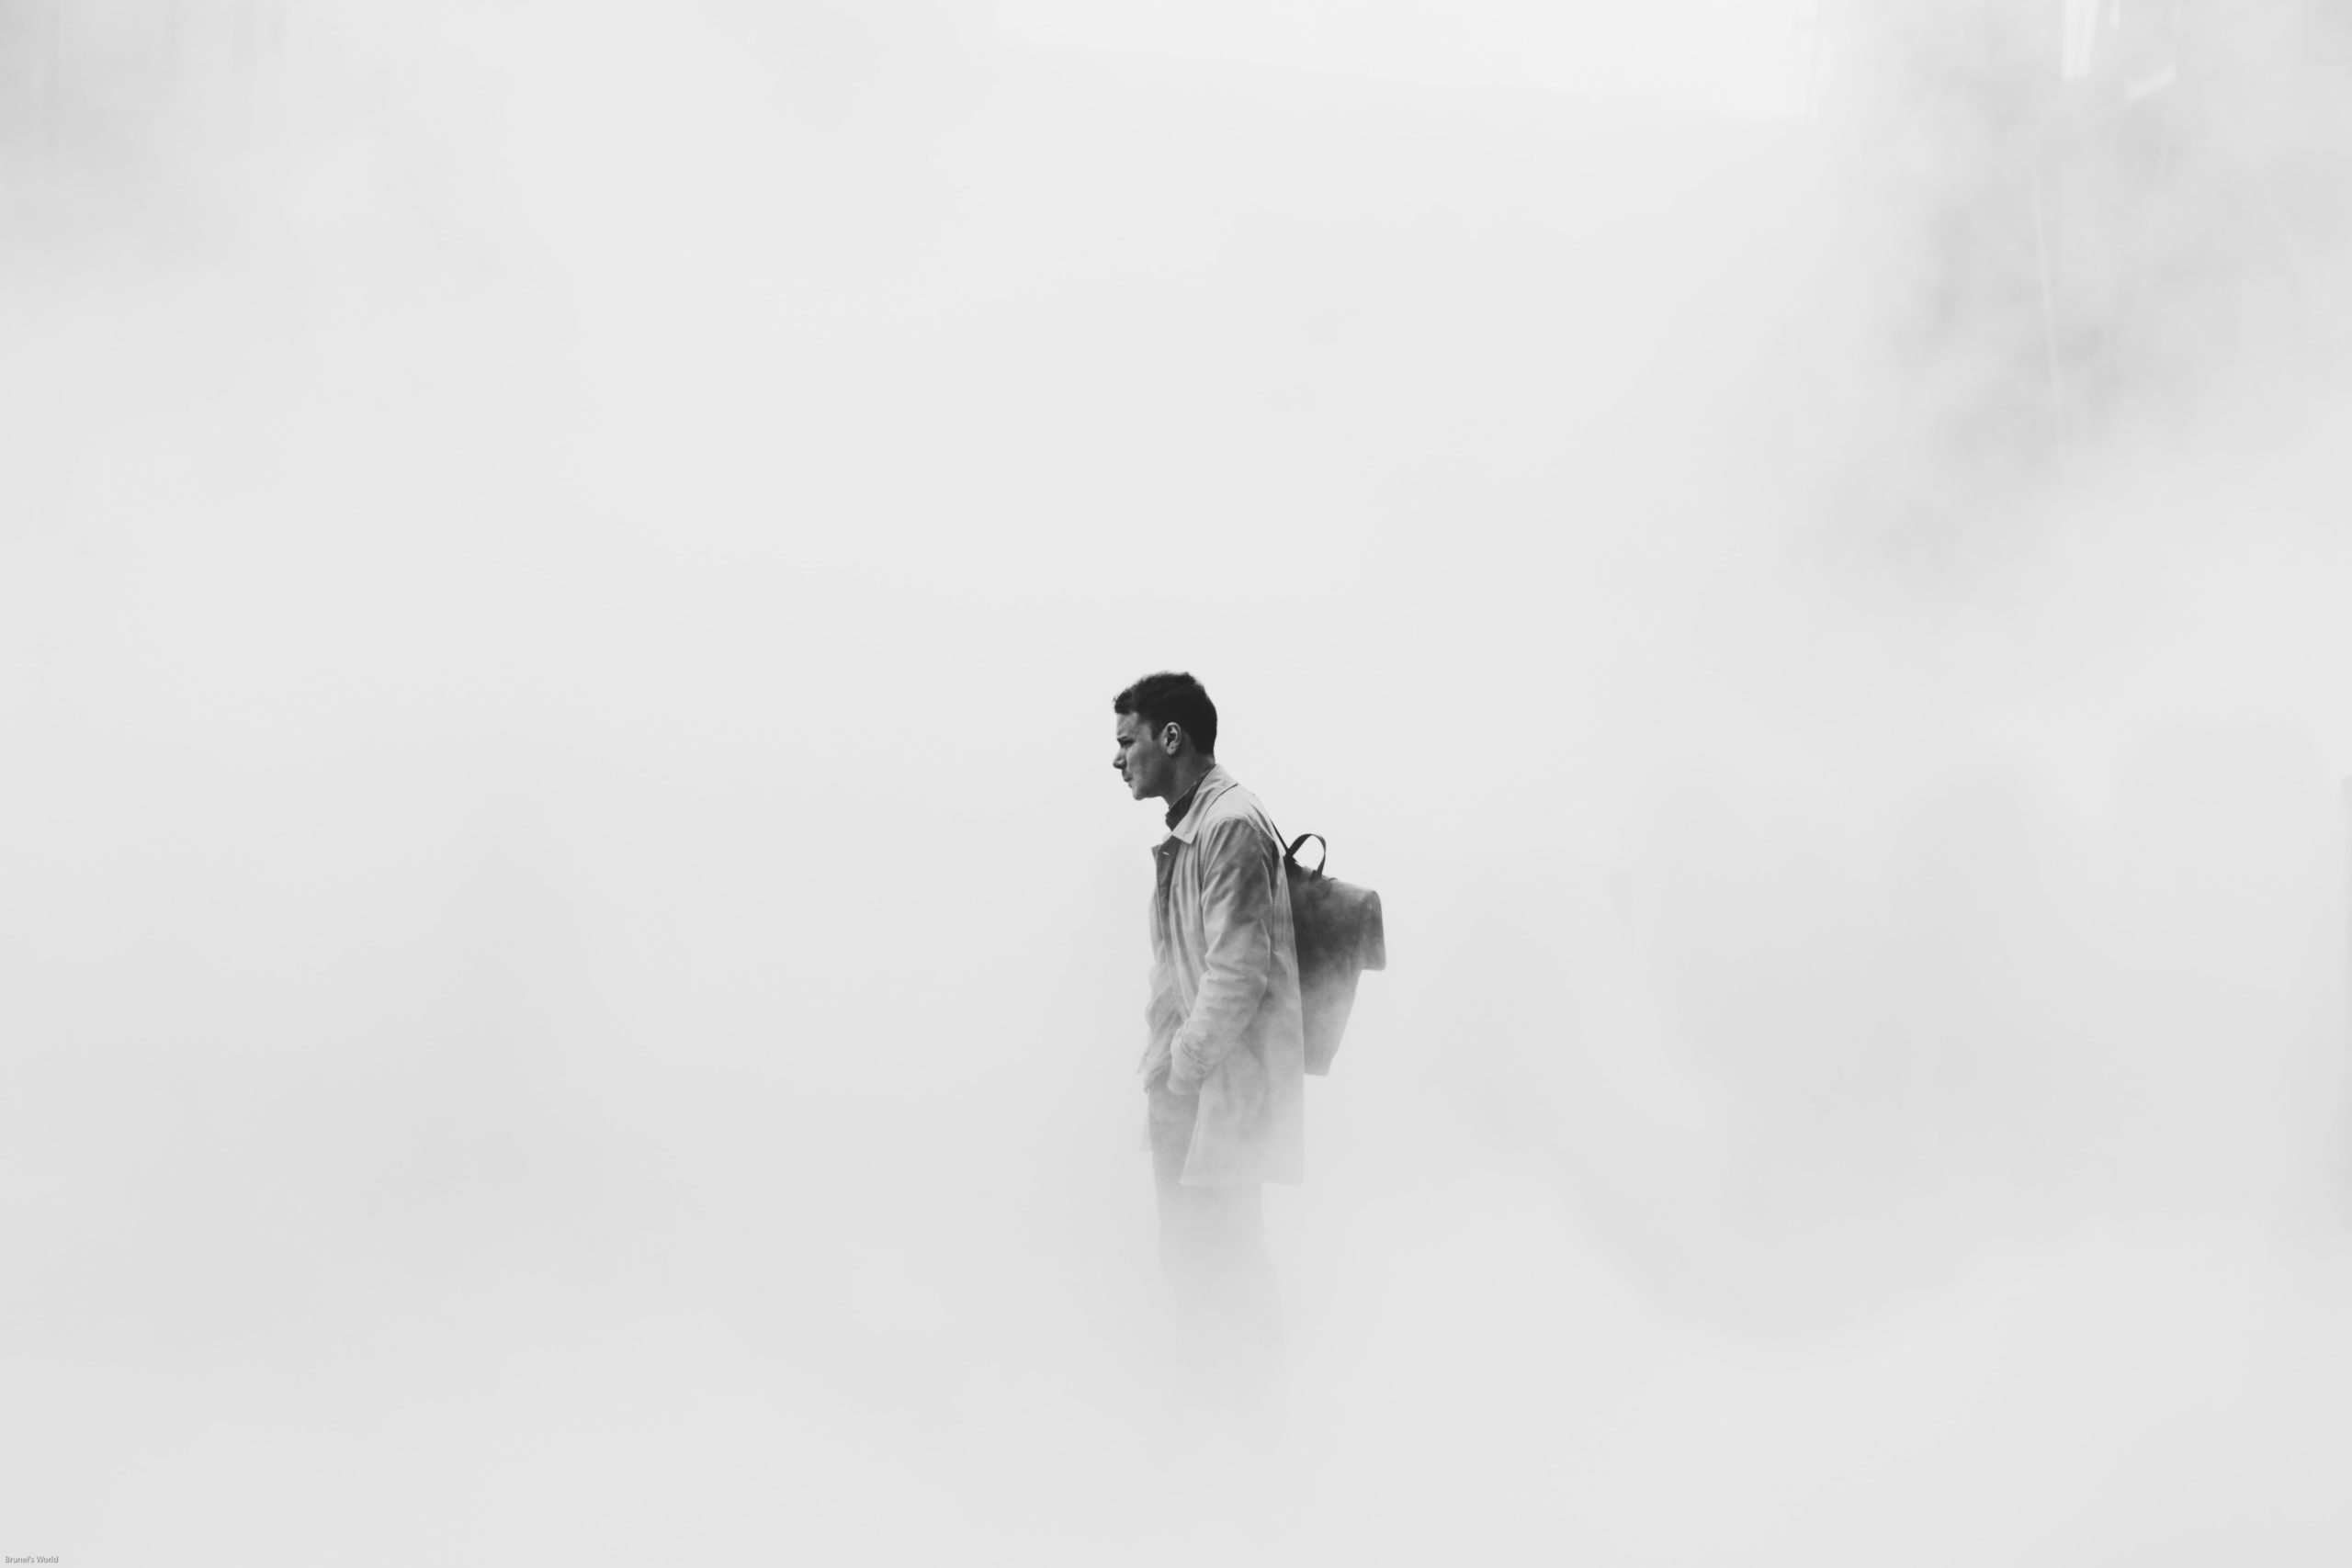 man in fog featured image for XRP article